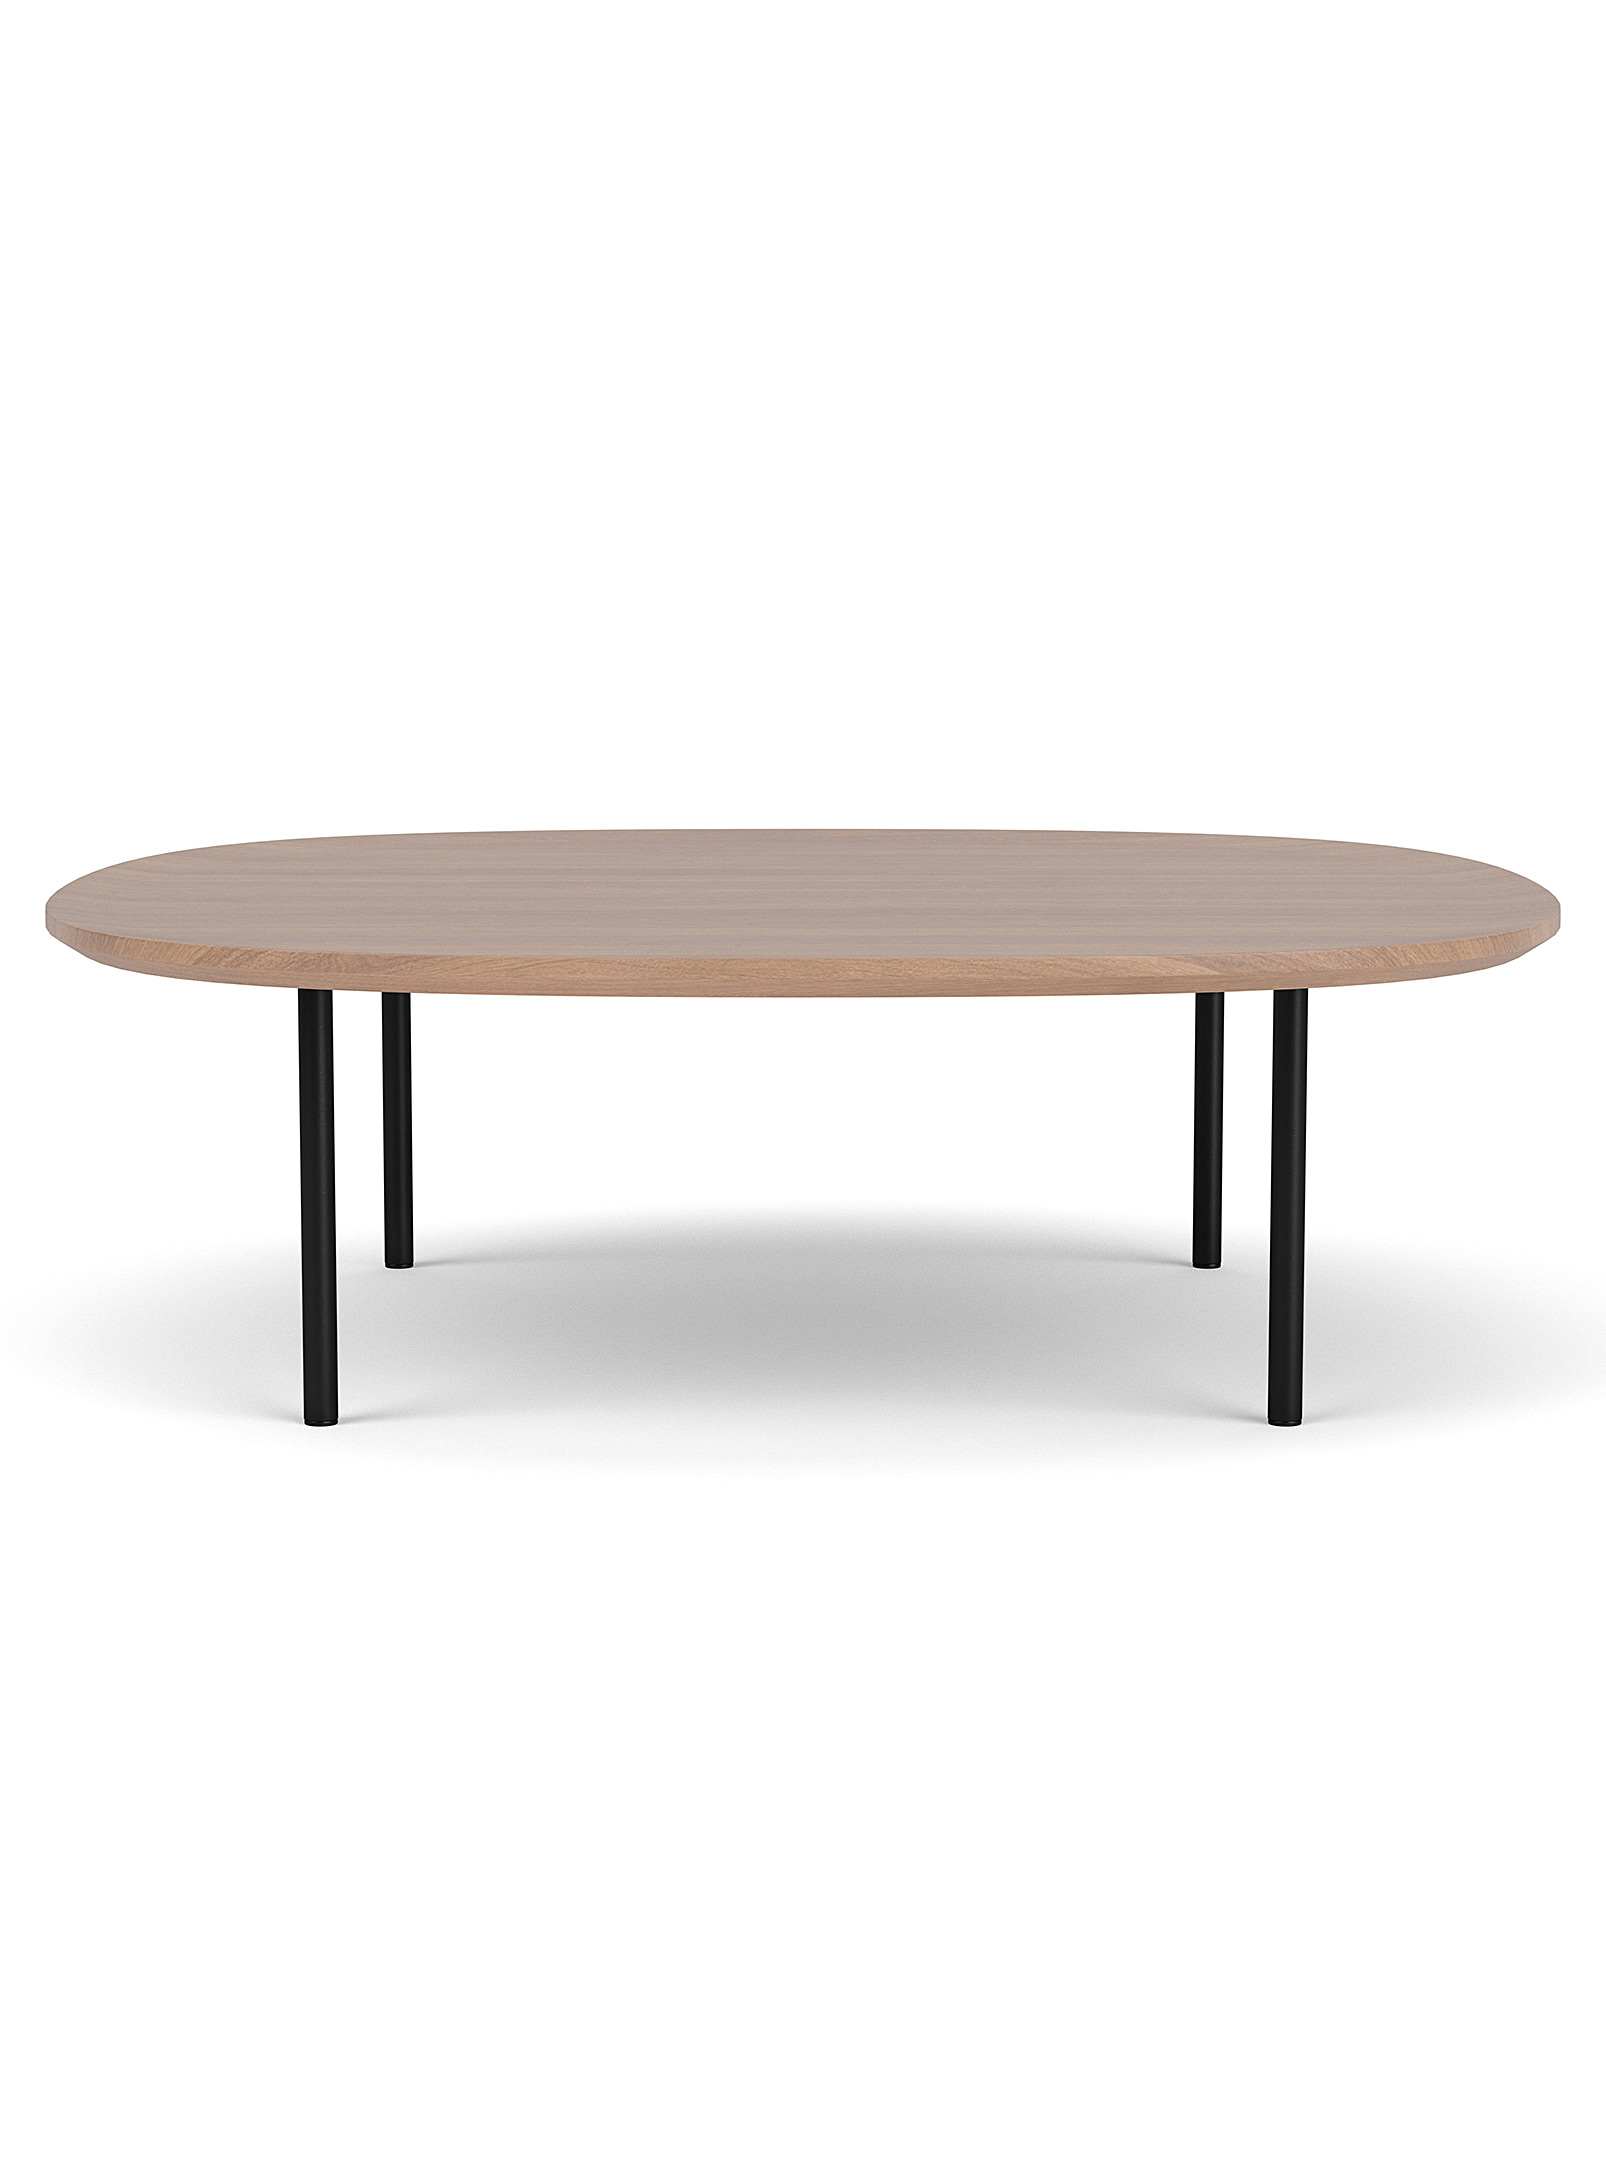 Eq3 Rounded Square Coffee Table In Brown